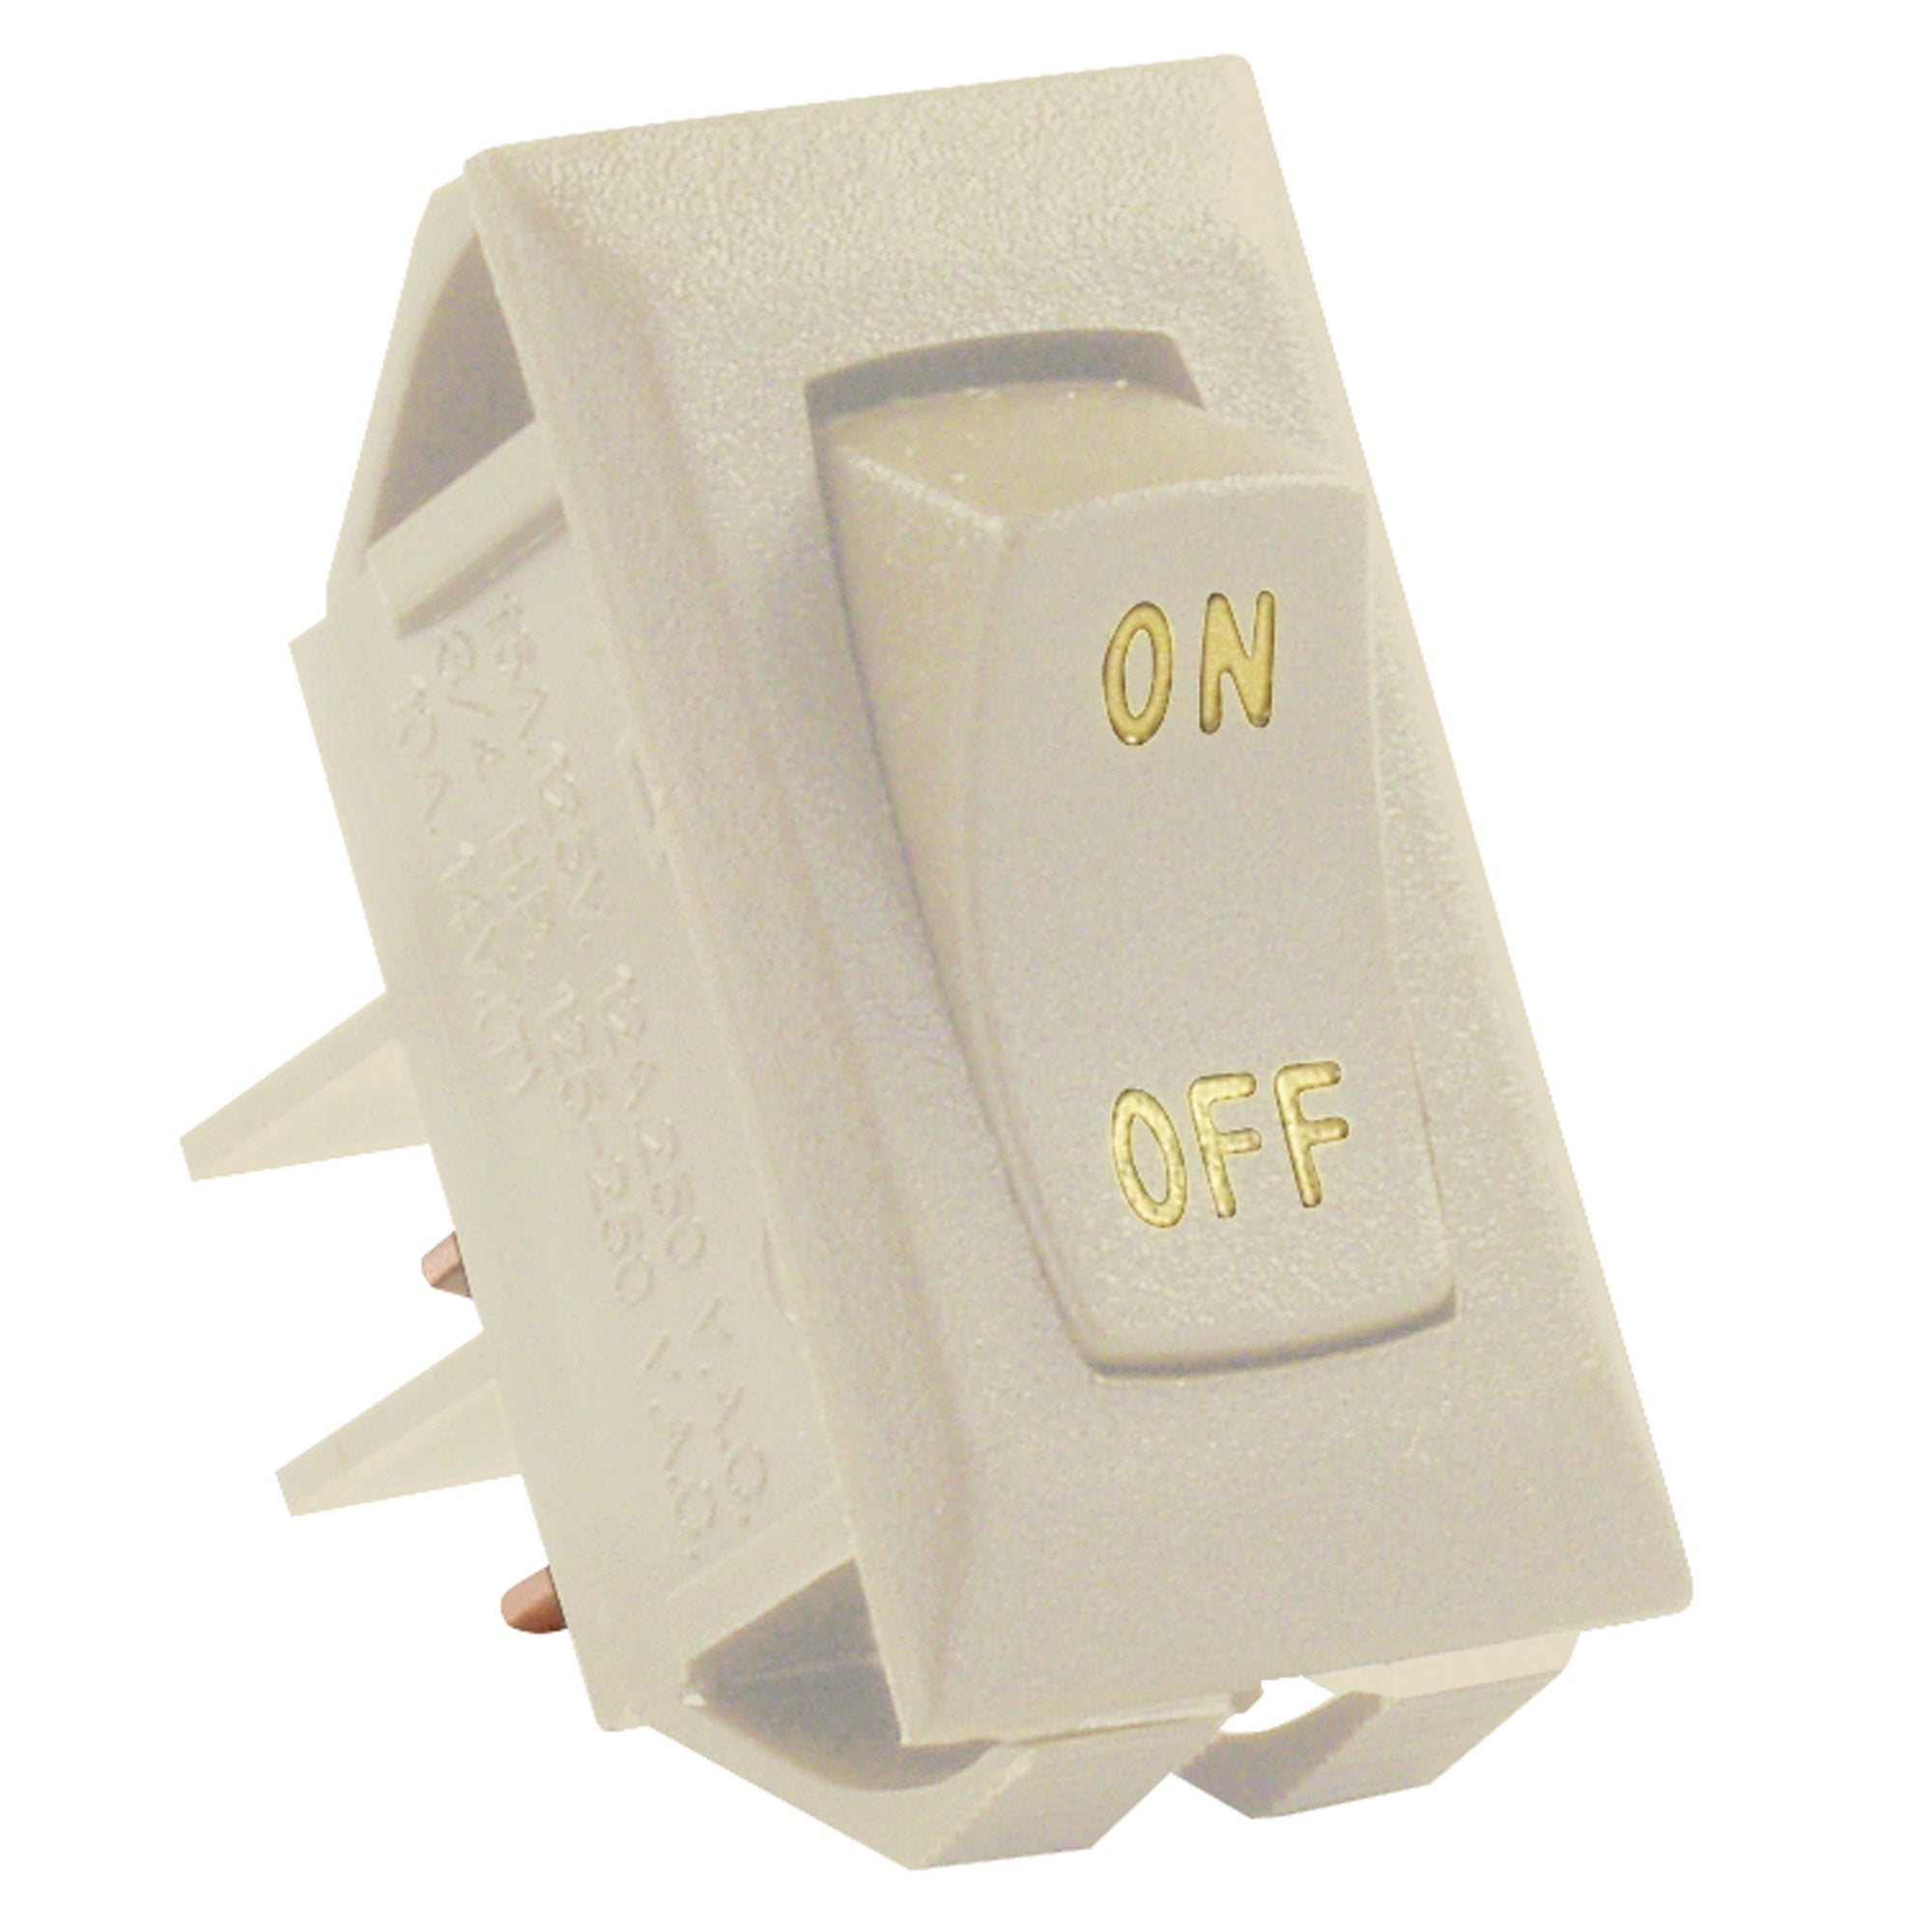 JR Products 12611-5 Labeled On/Off Switches, Pack of 5 - Ivory